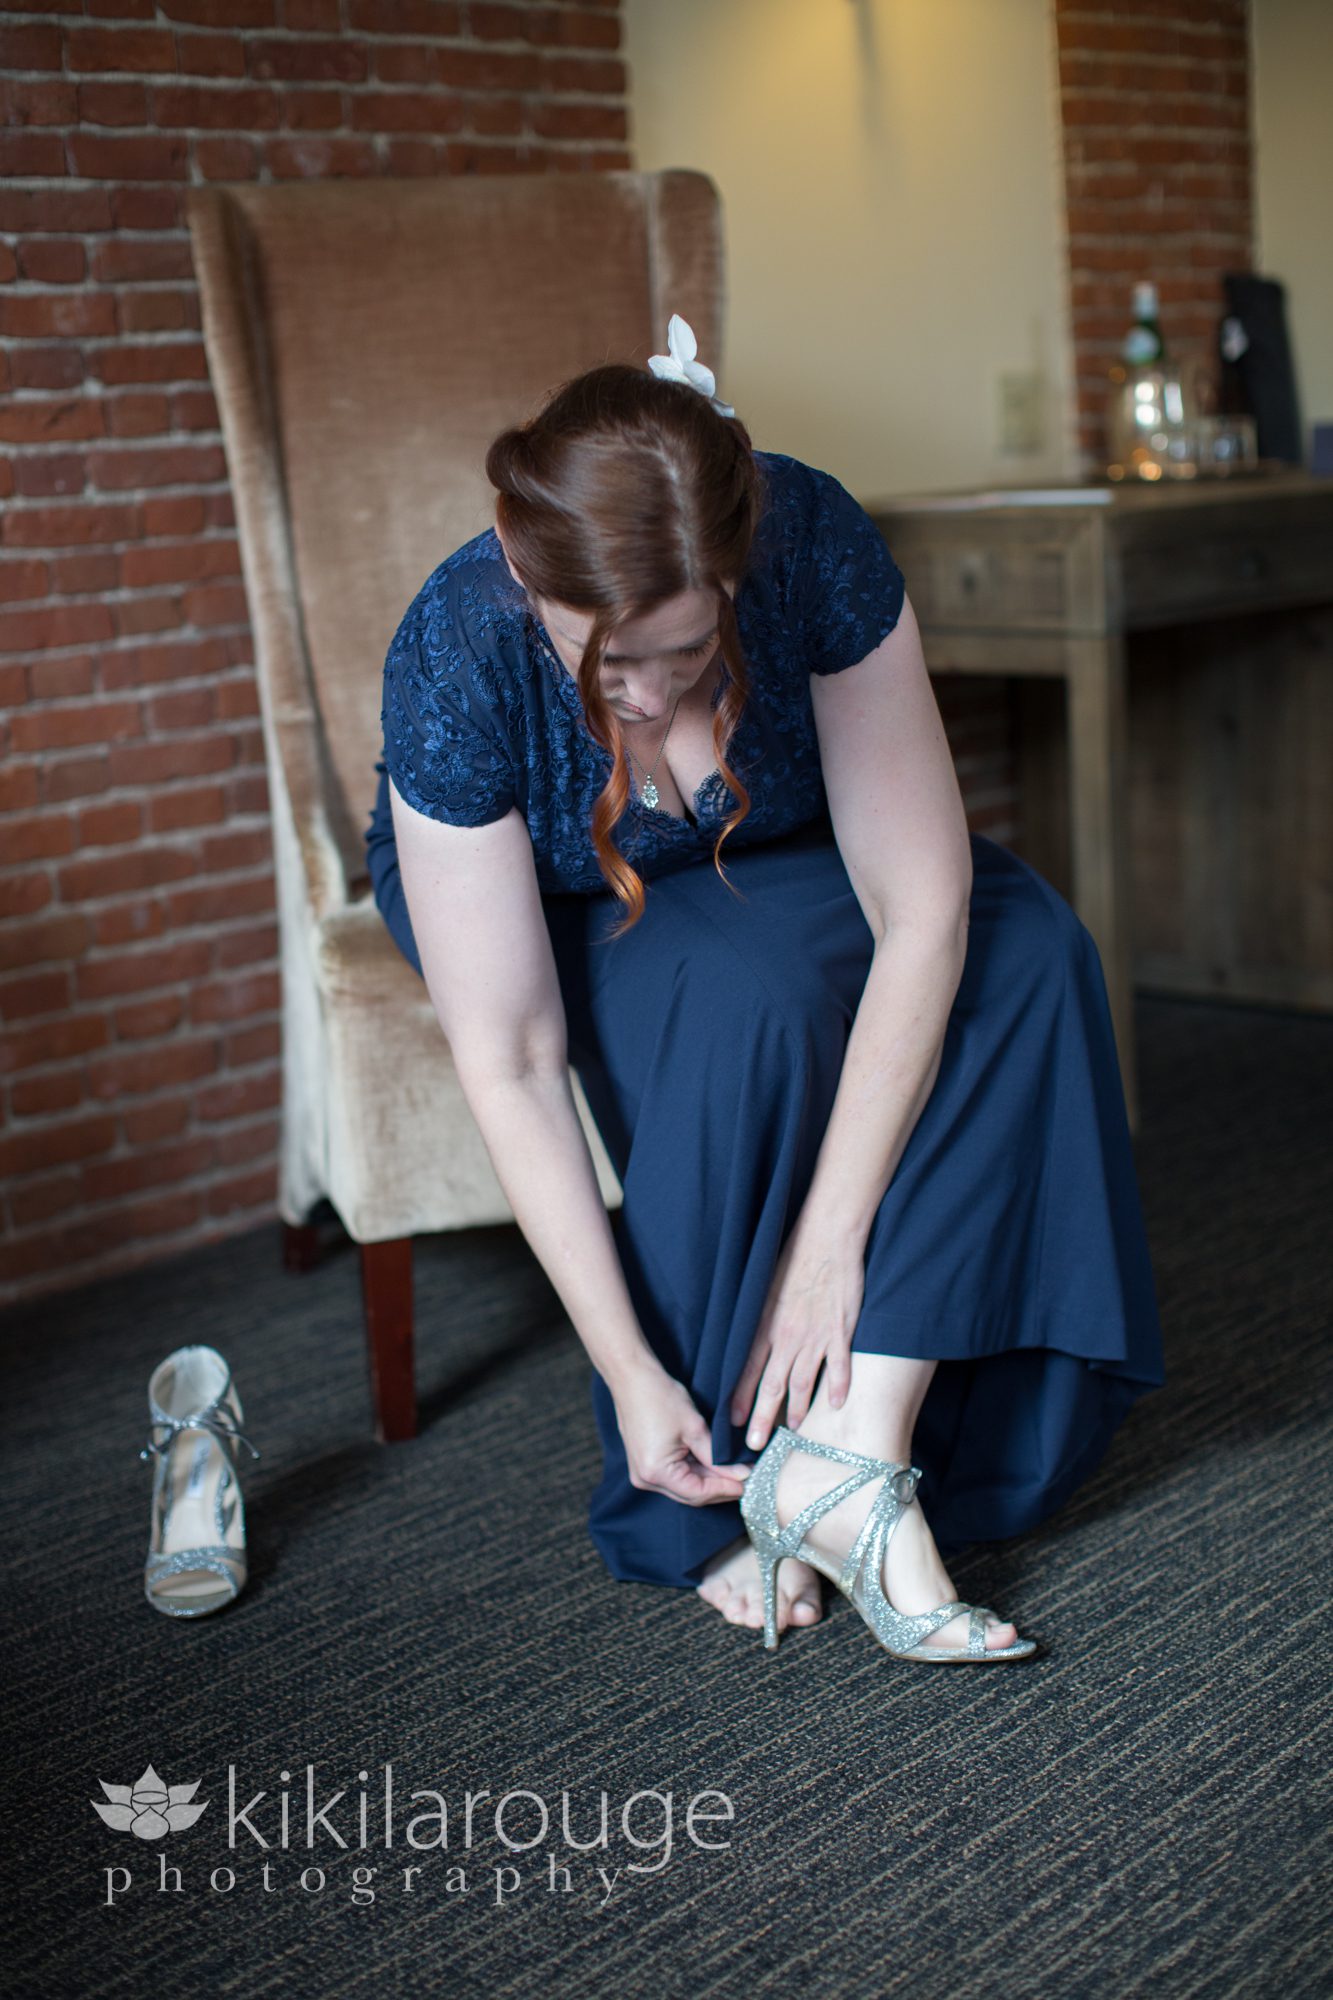 Bride in navy blue dress putting on shoes